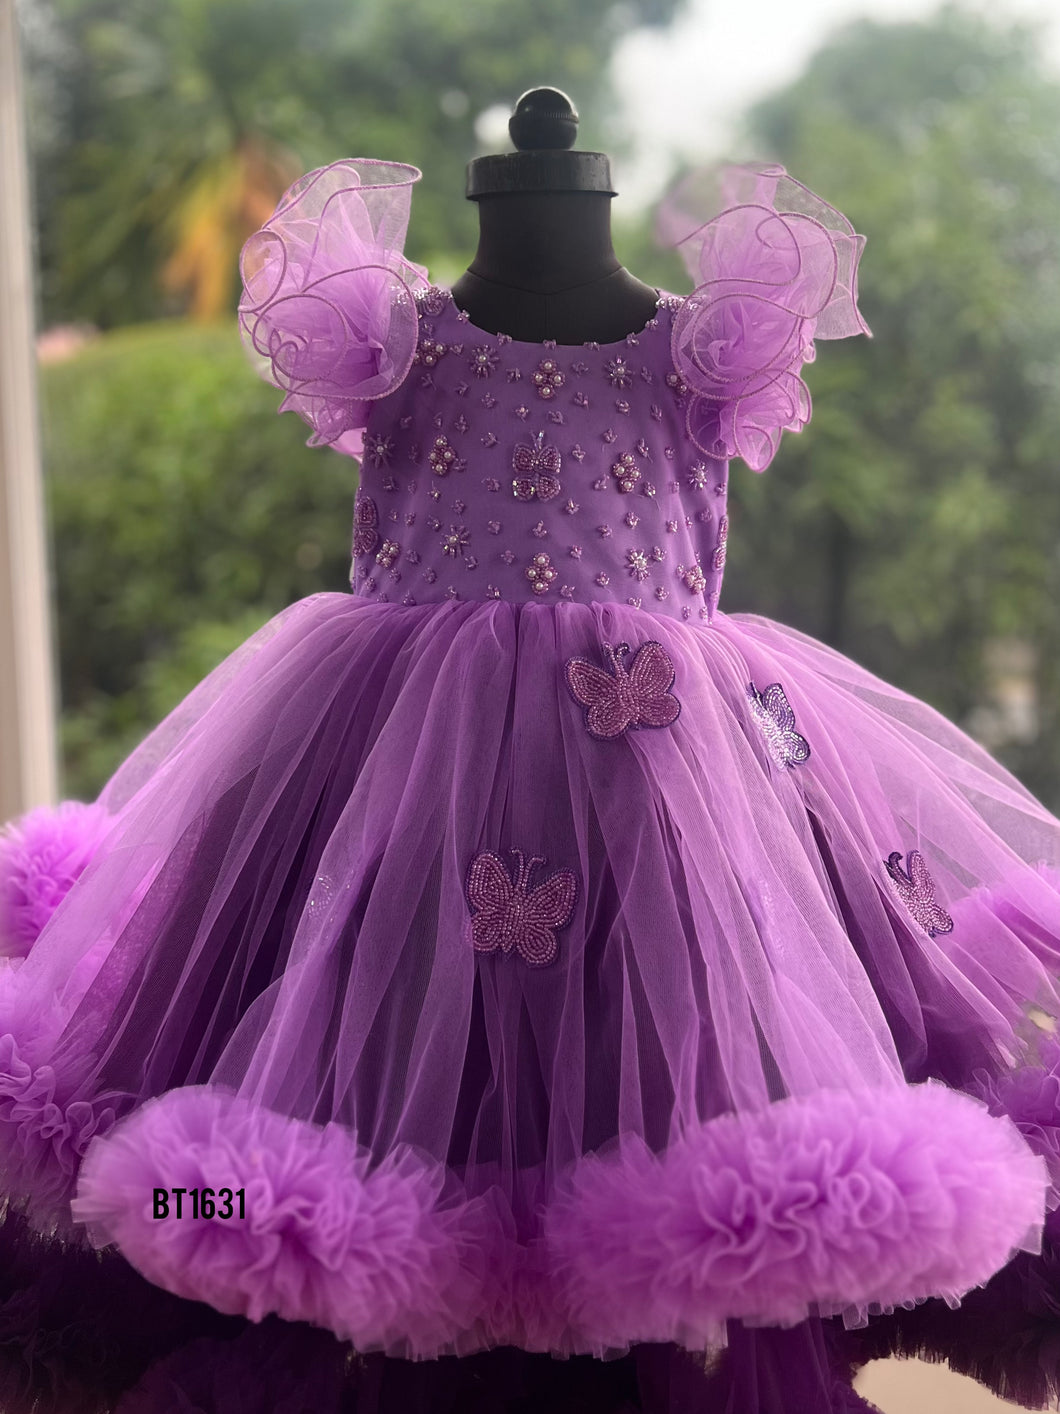 BT1631 Butterfly Theme Birthday Party Wear For Baby Girls